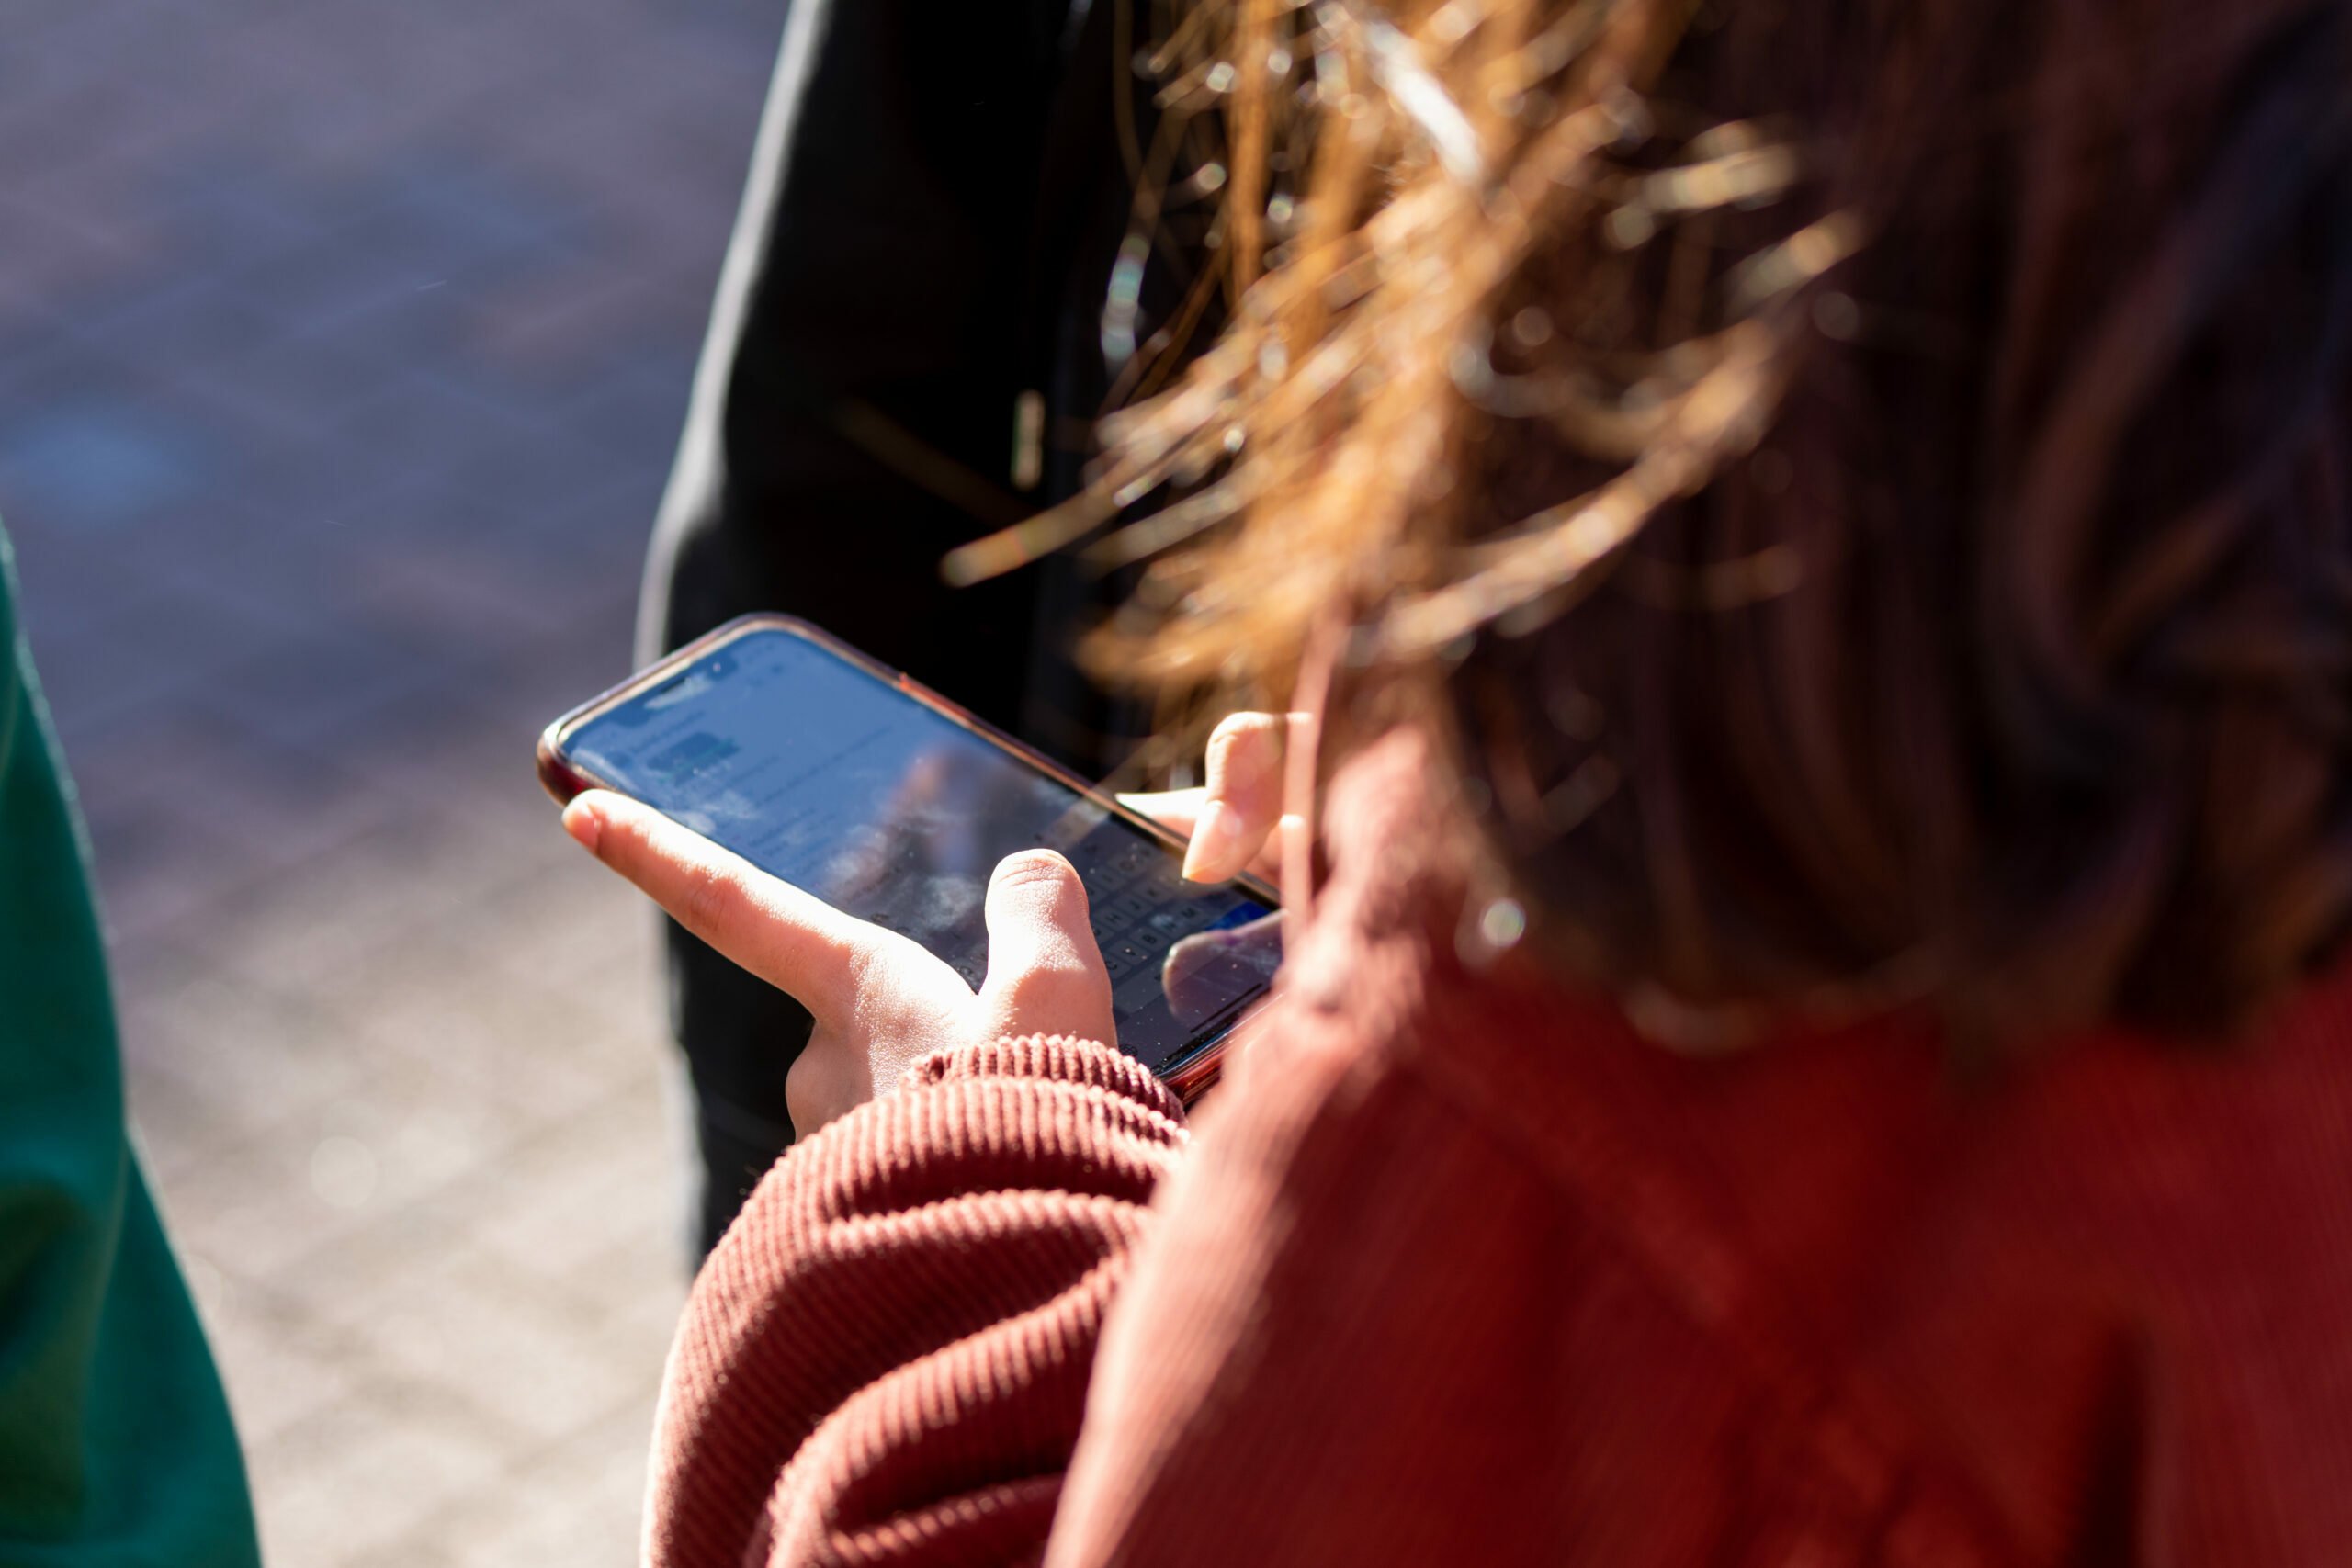 A young person holding a mobile phone. The photo is taken over her shoulder and we can just see her hands and the mobile.